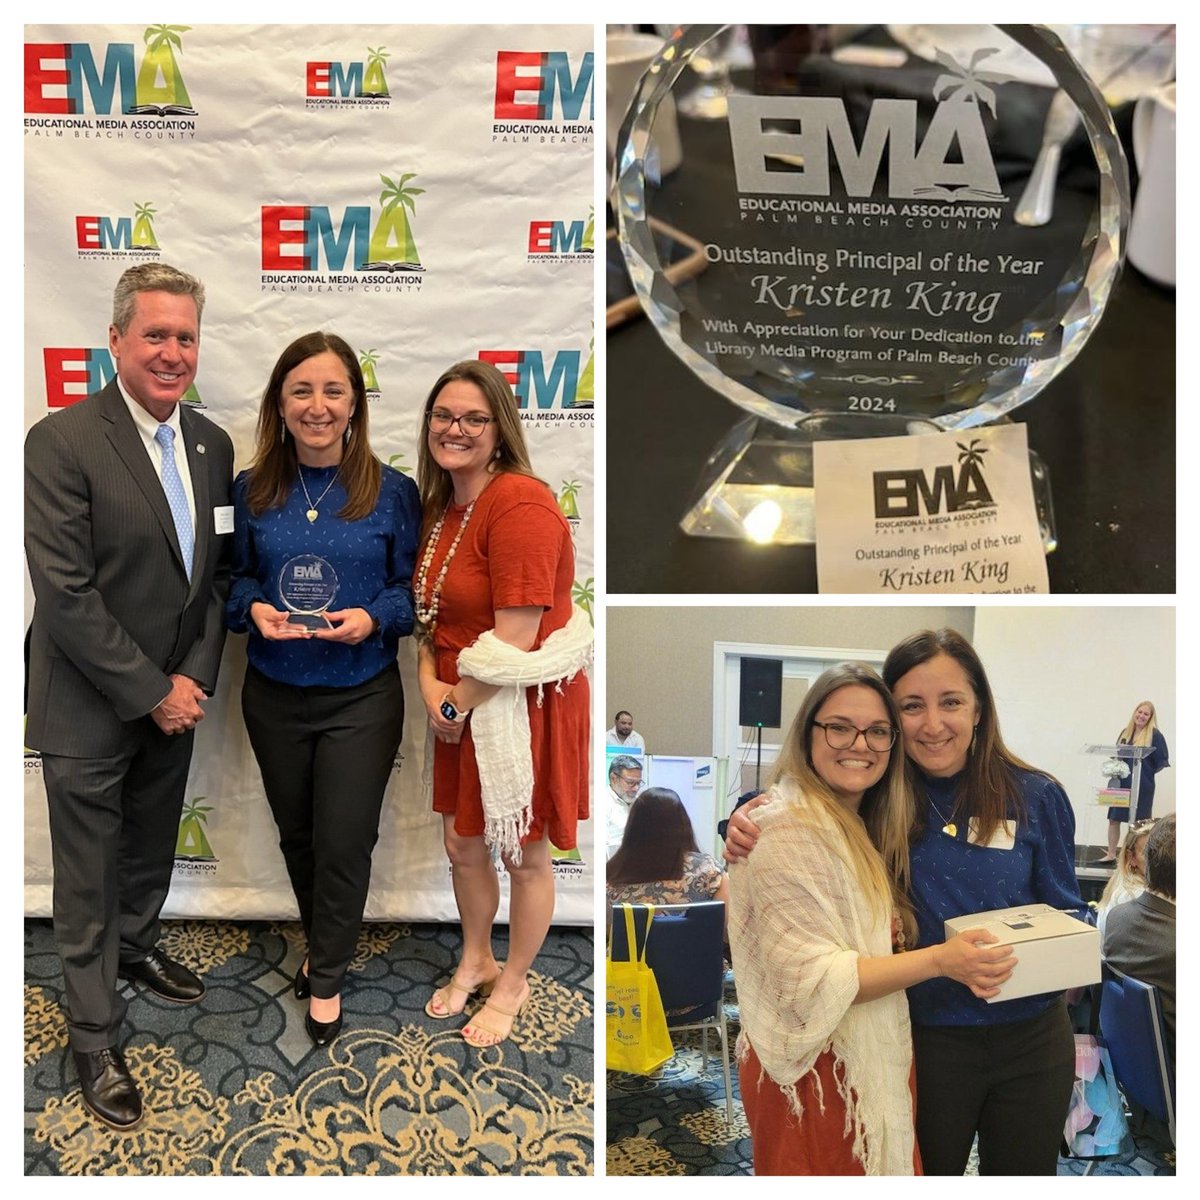 What a night! My principal is @emapbc's Outstanding Principal of the Year!!! 🎉🥳🙌👏 Her unwavering support of our library program & my role in our school community has made such an immense impact. Well deserved @JTE_Principal! ❤️🌟 #TigersReachingNewHeights #lovemylibraryPBCSD